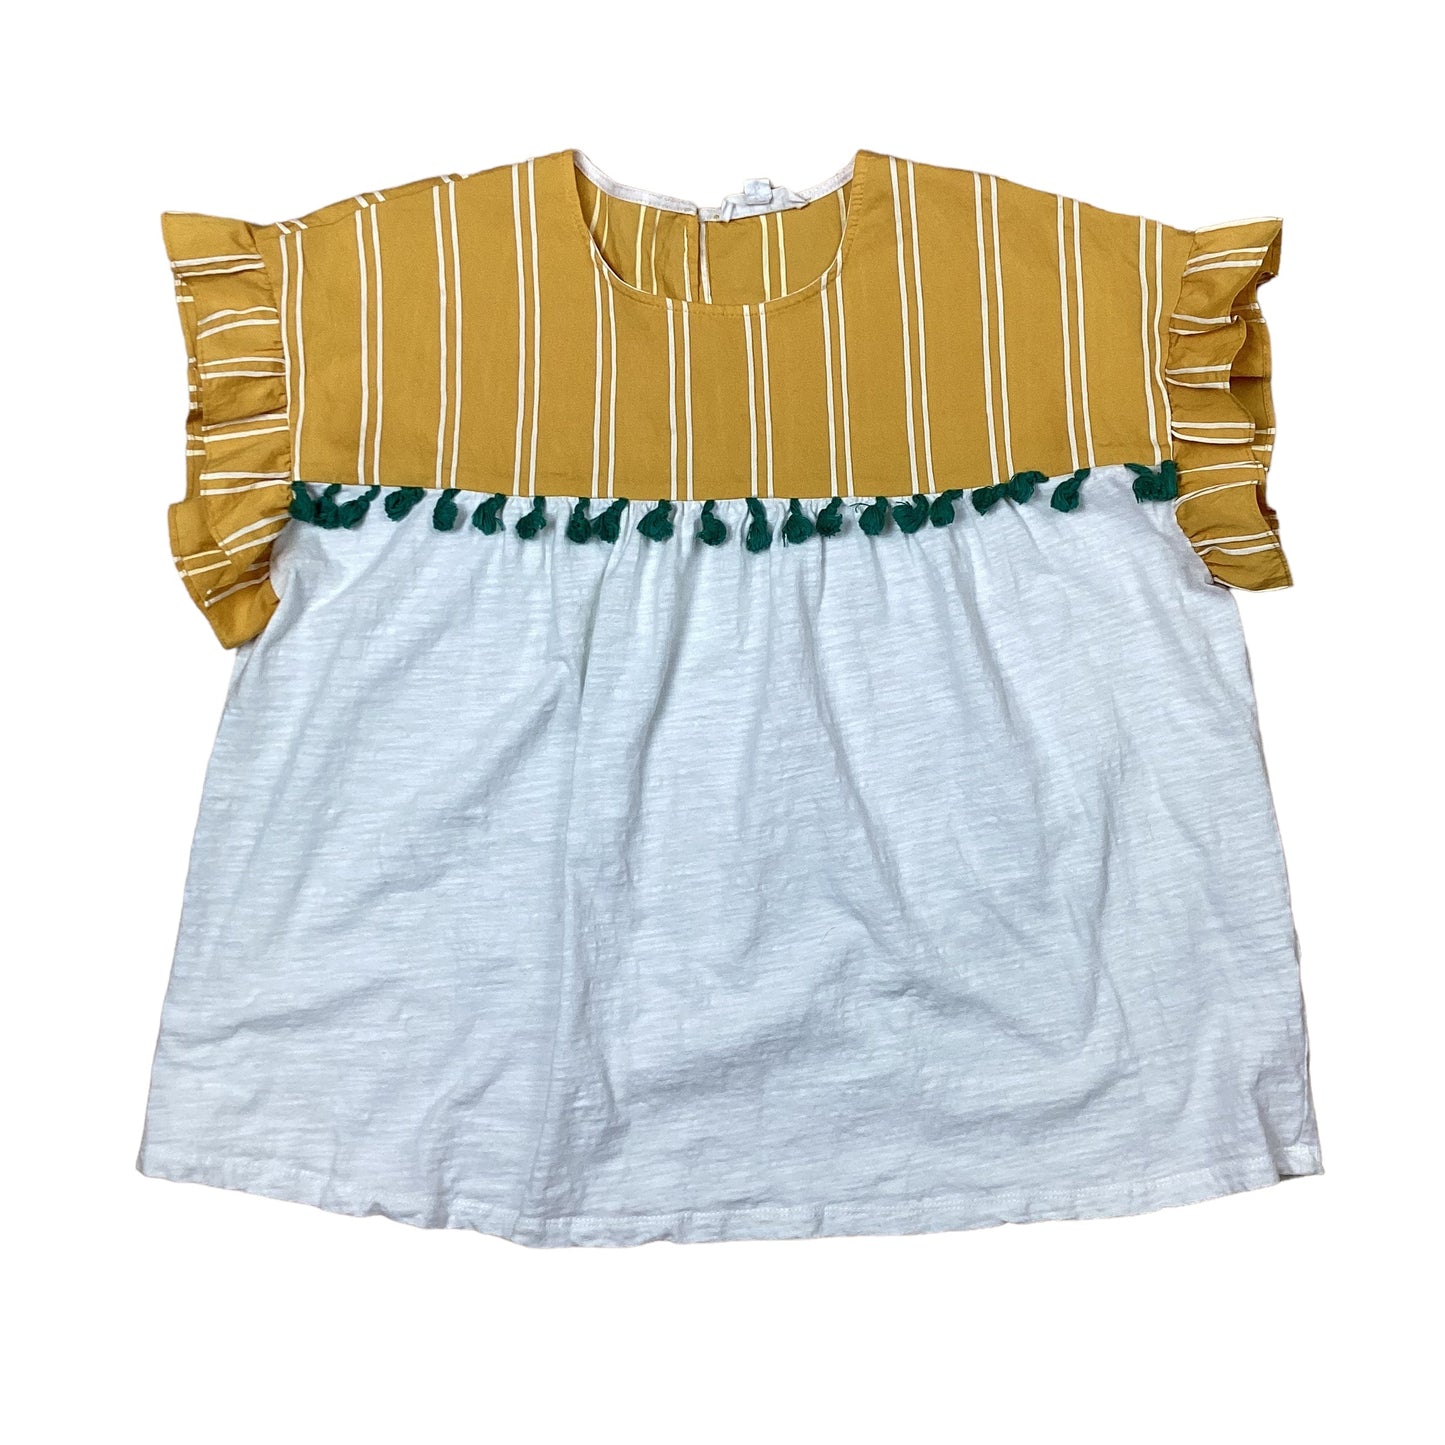 Yellow Top Short Sleeve Thml, Size L